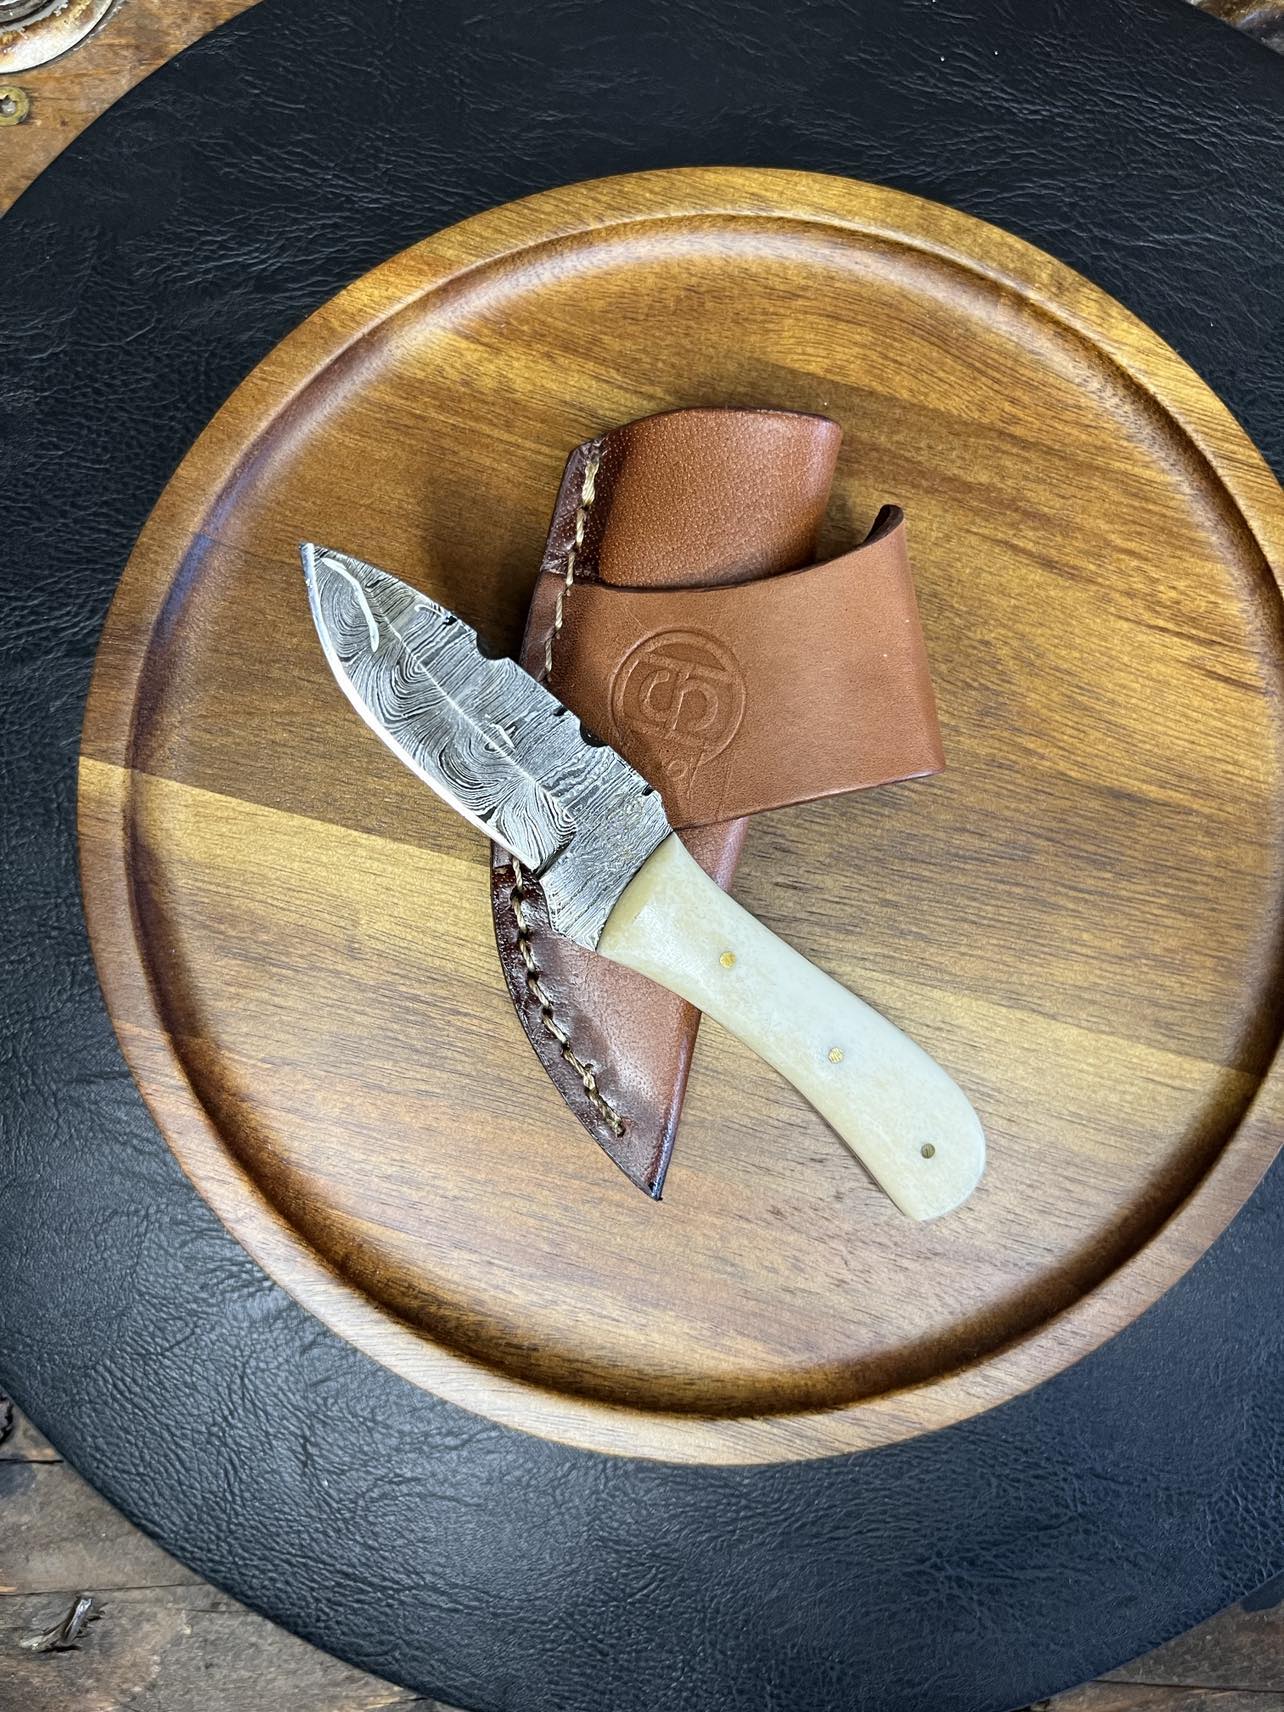 Bone Grip Damascus blade Knife with Sheath TXBD-6-Knives-WESTERN FASHION ACCESSORIES-Lucky J Boots & More, Women's, Men's, & Kids Western Store Located in Carthage, MO